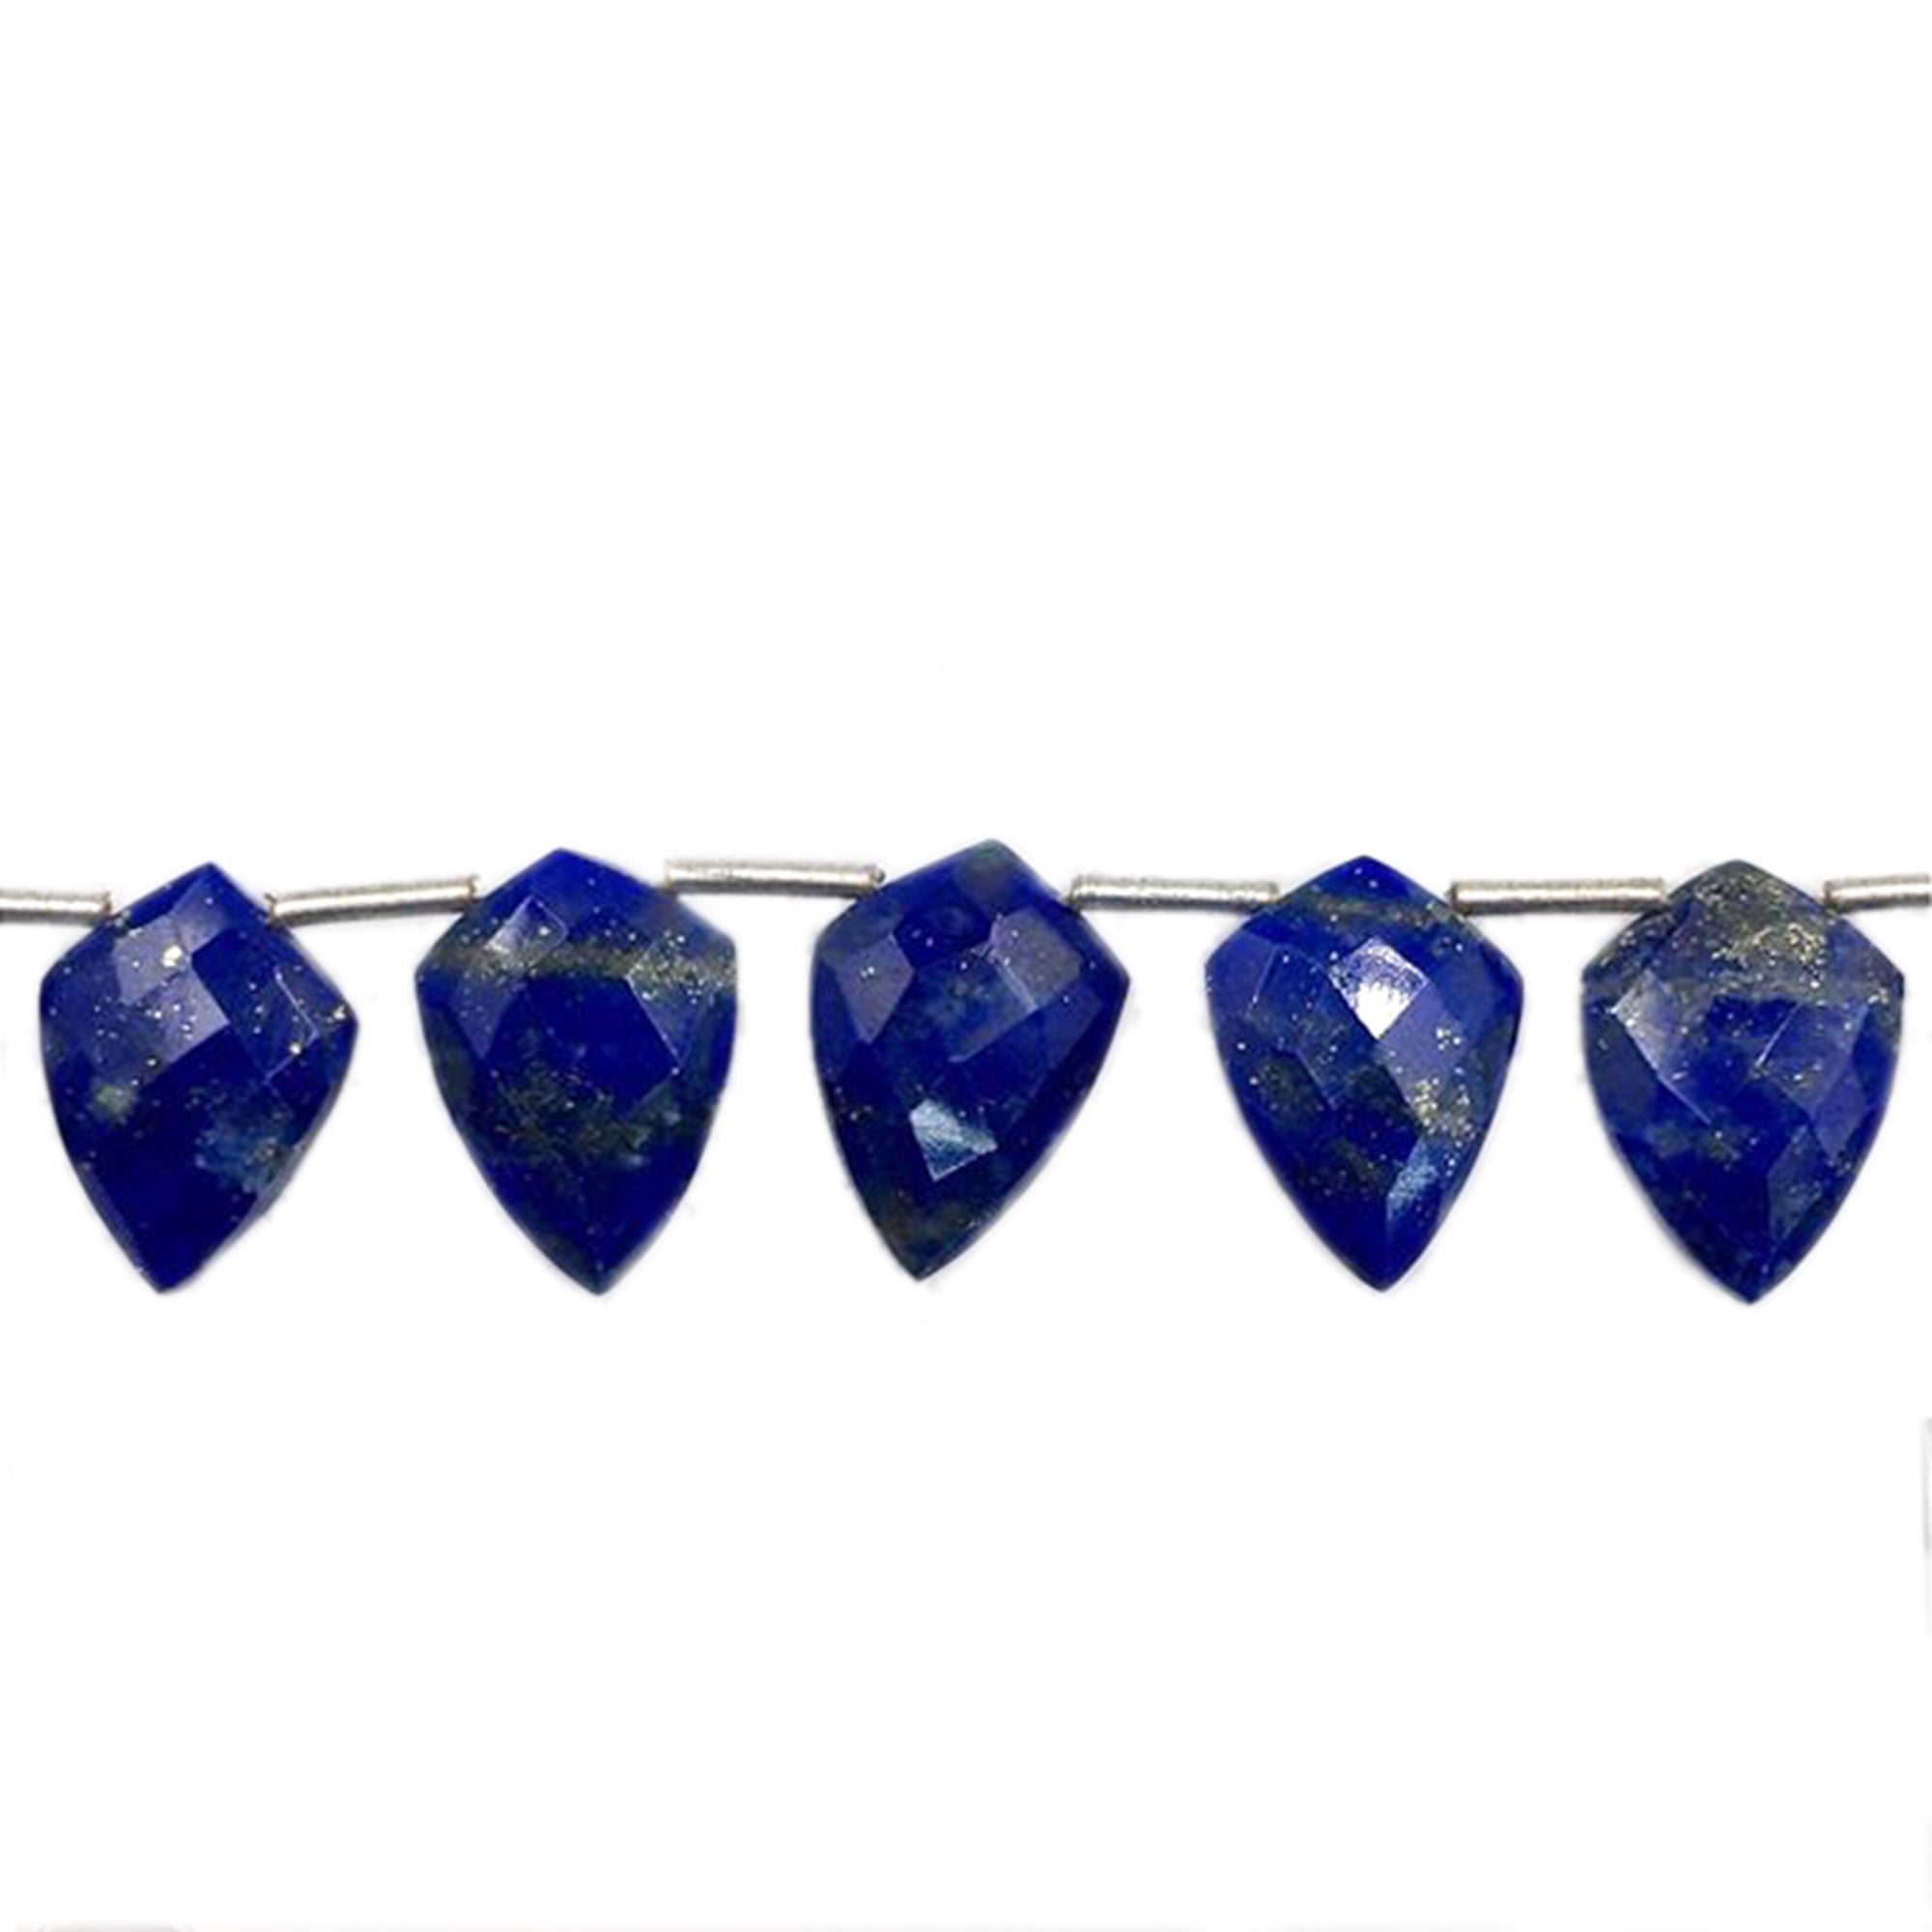 Lapis Lazuli 13X10 MM Faceted Shield Shape Beads Strand